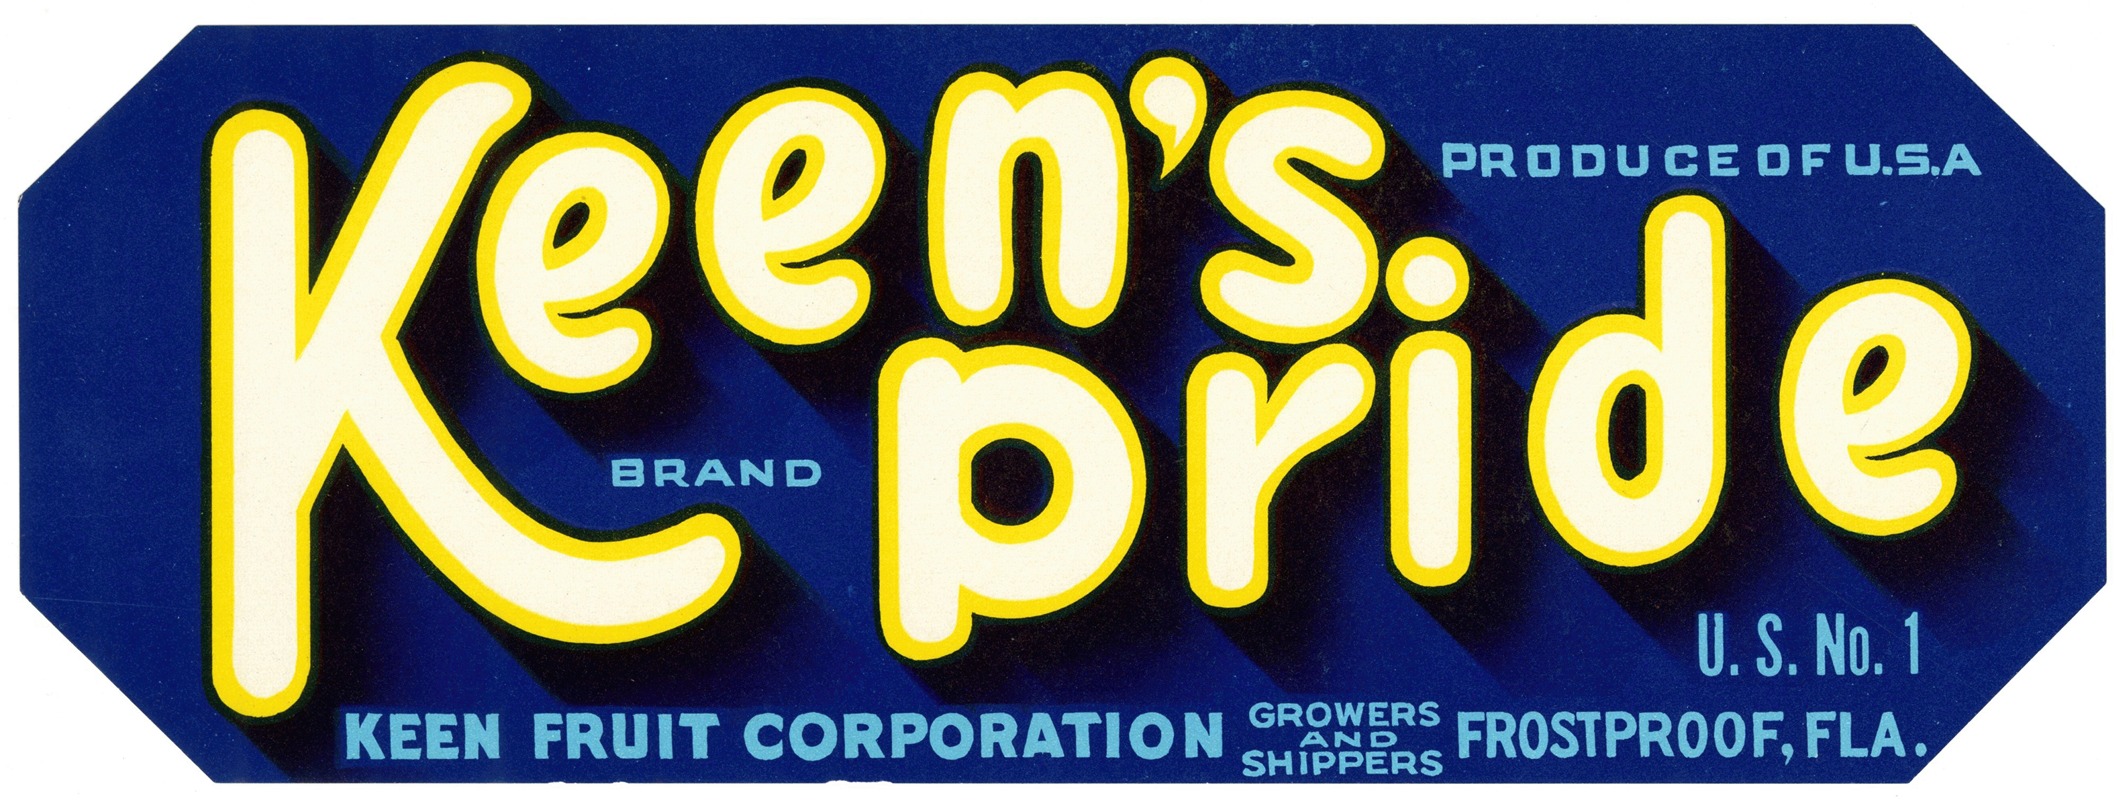 Anonymous - Keen’s Pride Brand Fruit Label